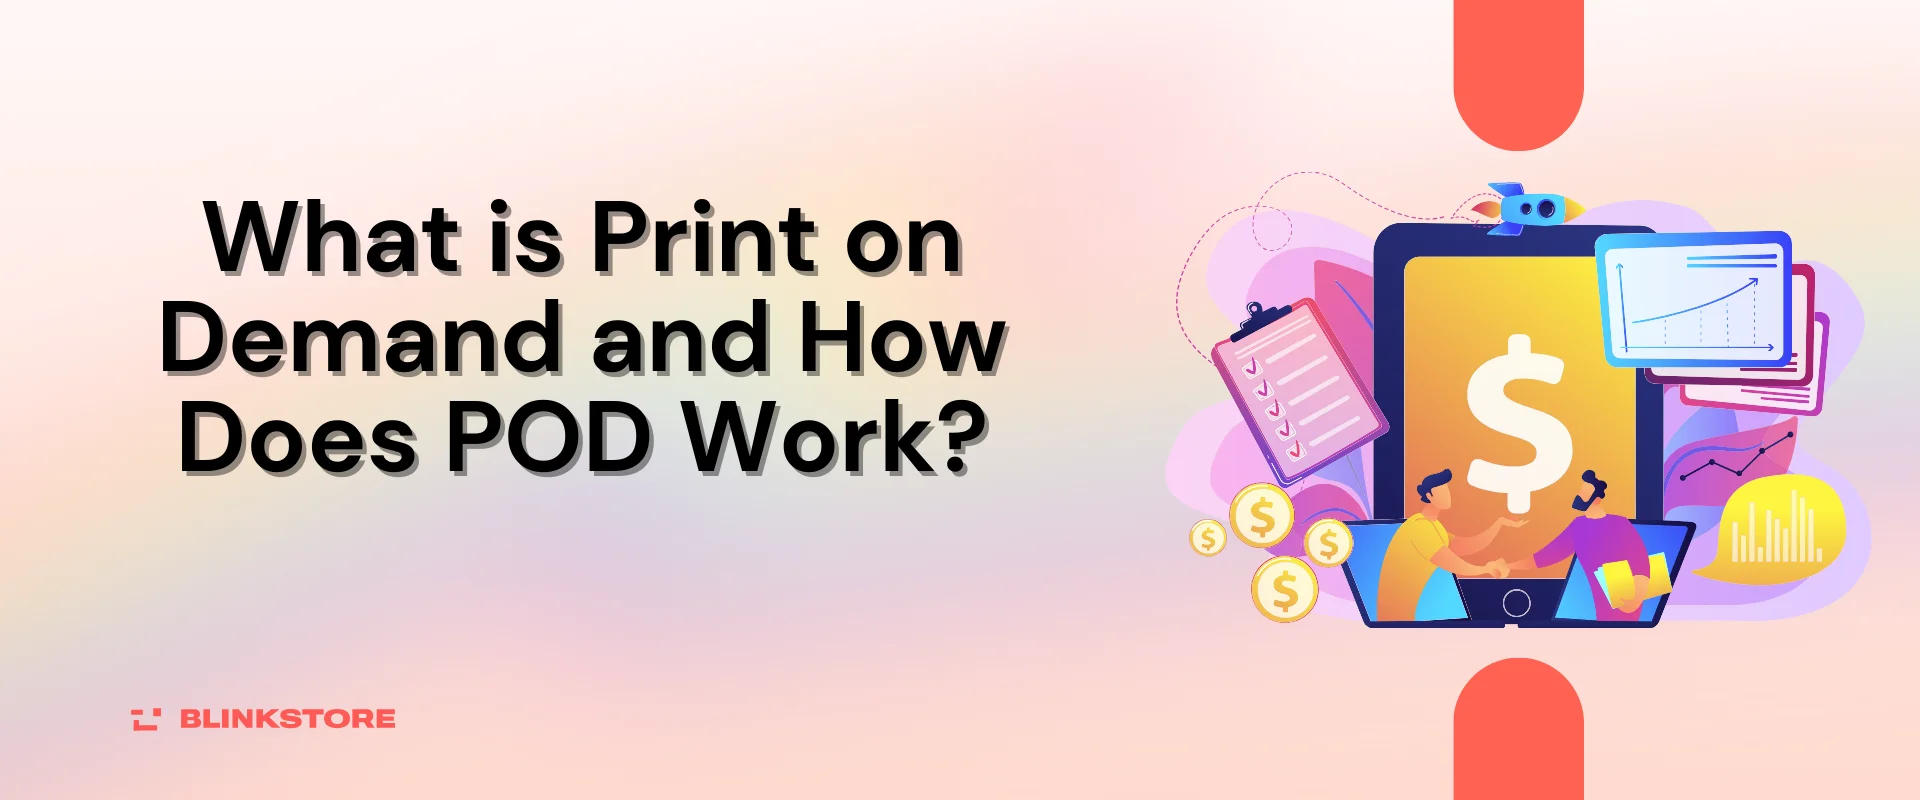 What is Print on Demand and How Does POD Work?